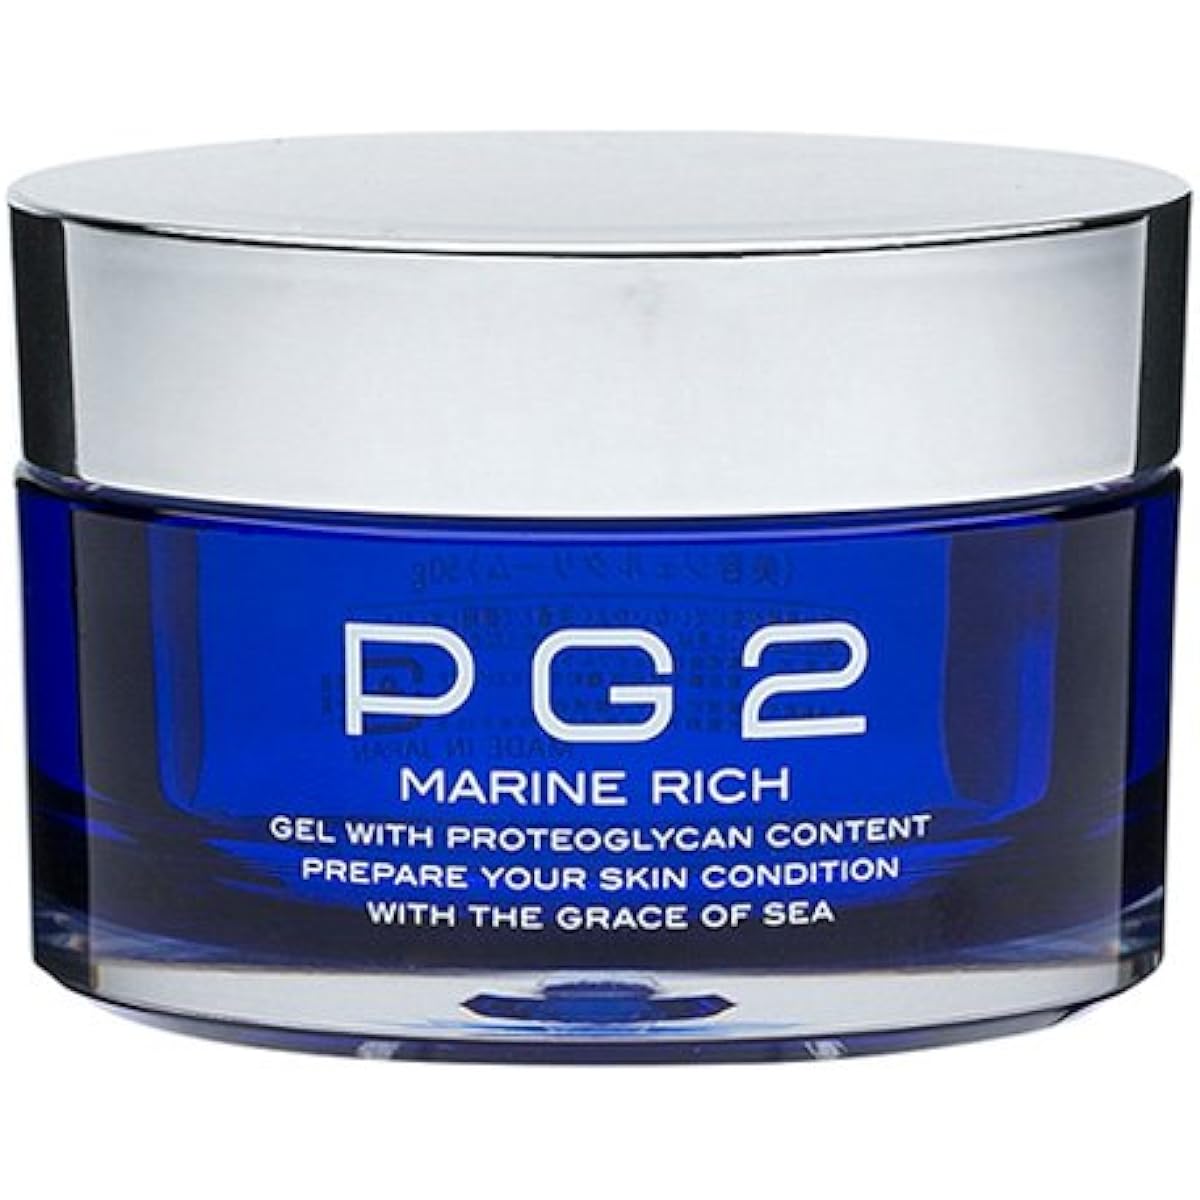 PG2 Marine Rich Proteoglycan All-in-One